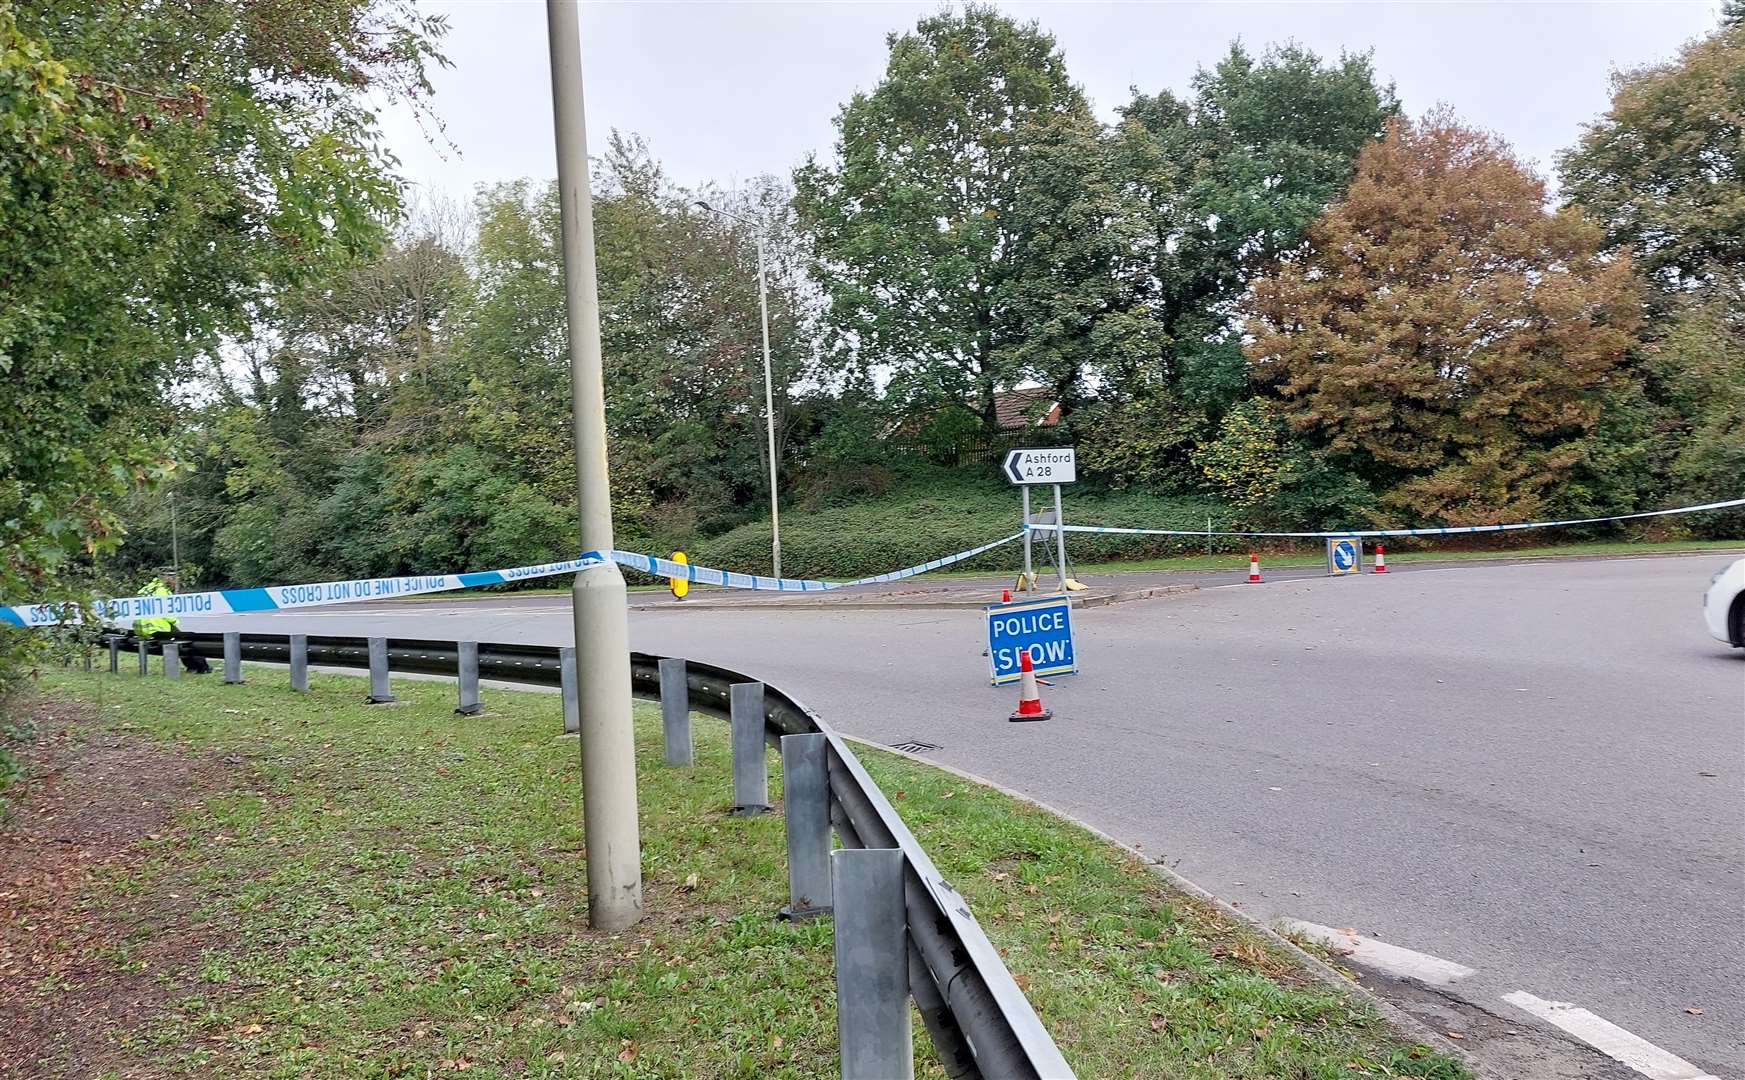 Police closed the A28 Great Chart Bypass in Ashford on Monday, October 23